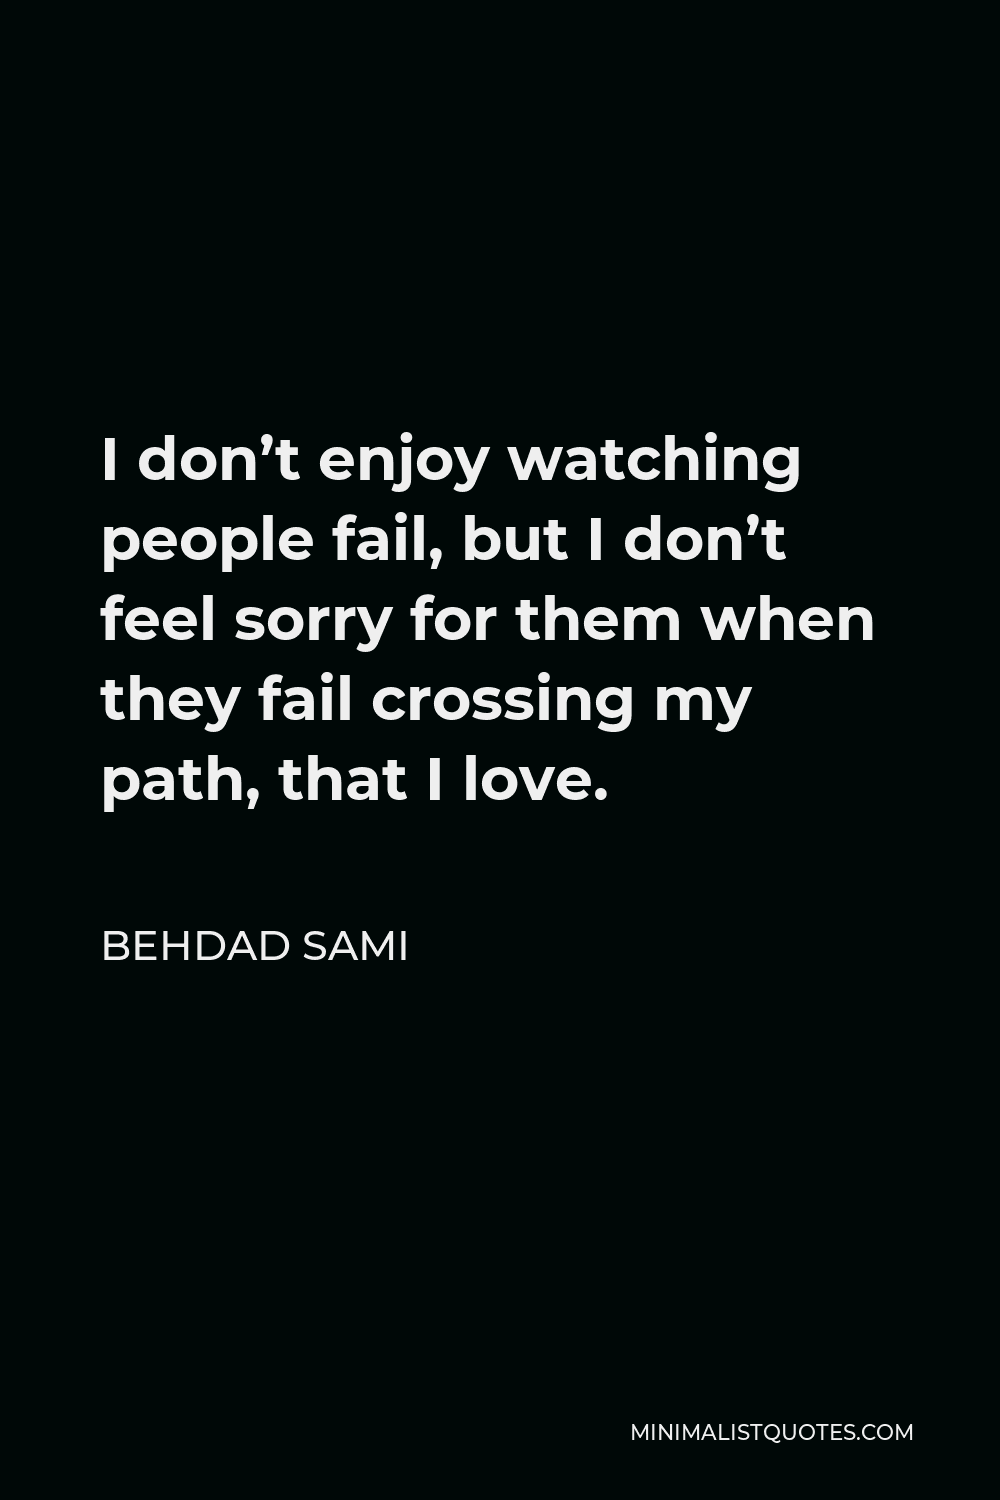 Behdad Sami Quote - I don’t enjoy watching people fail, but I don’t feel sorry for them when they fail crossing my path, that I love.